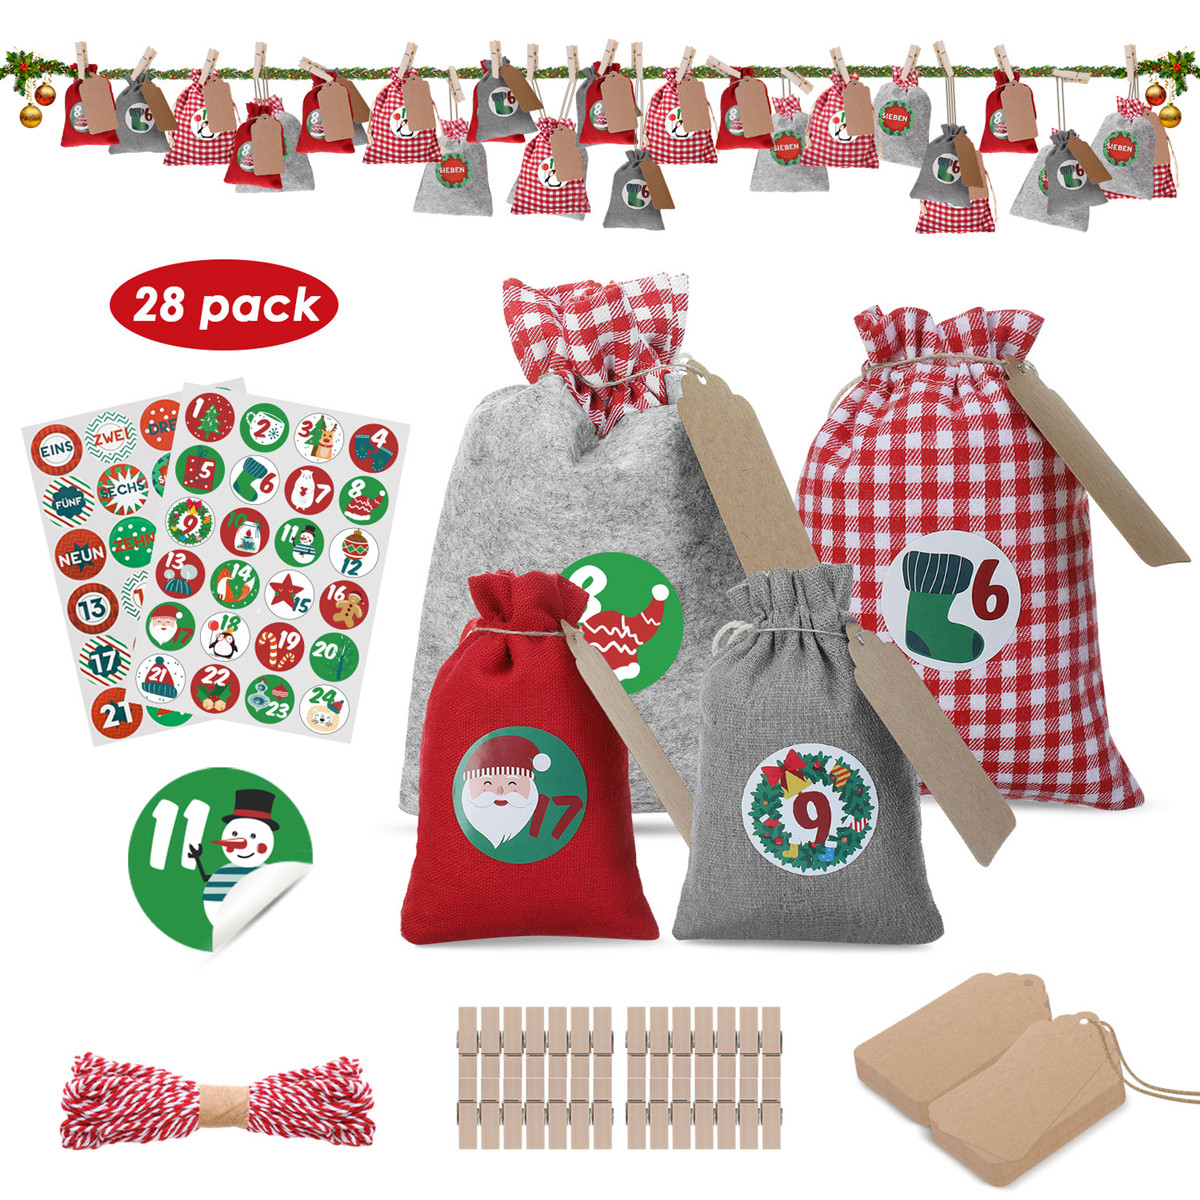 JOYXEON-28PCS-Christmas-Hanging-Advent-Calendars-Countdown-Drawstring-Gift-Bags-Candy-Biscuit-Pouche-1896442-2